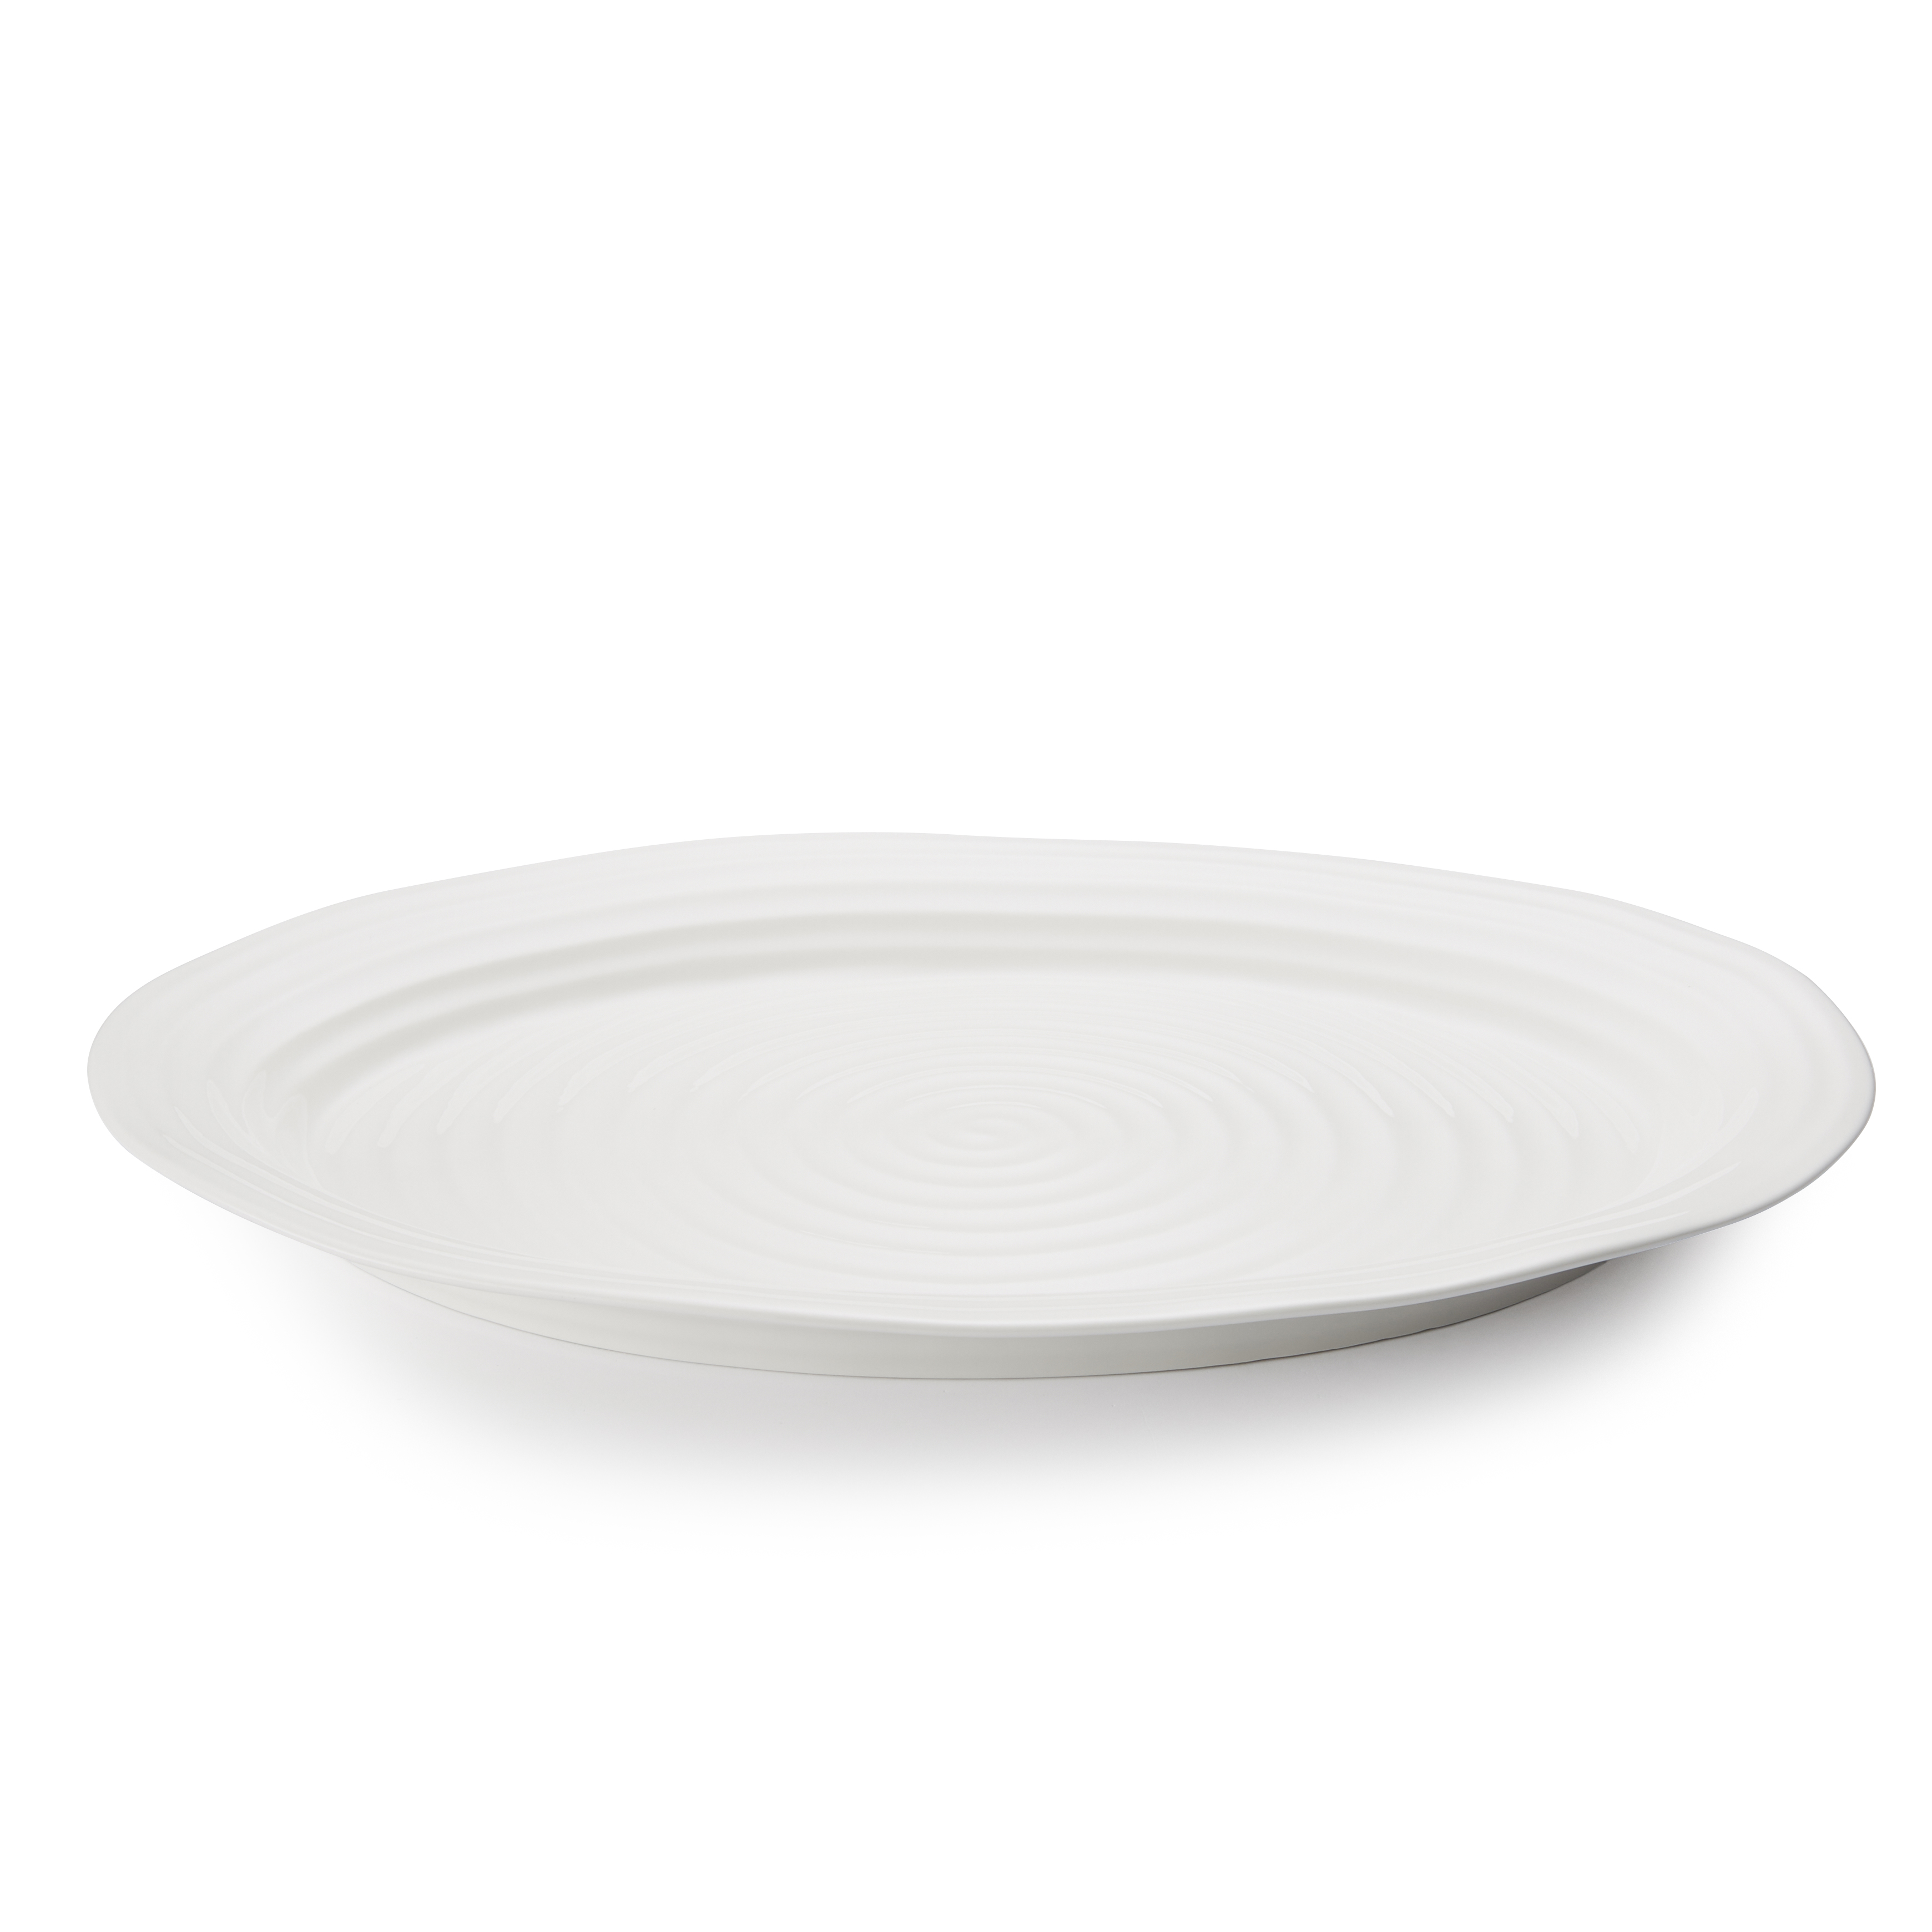 Sophie Conran Large Oval Serving Plate, White image number null